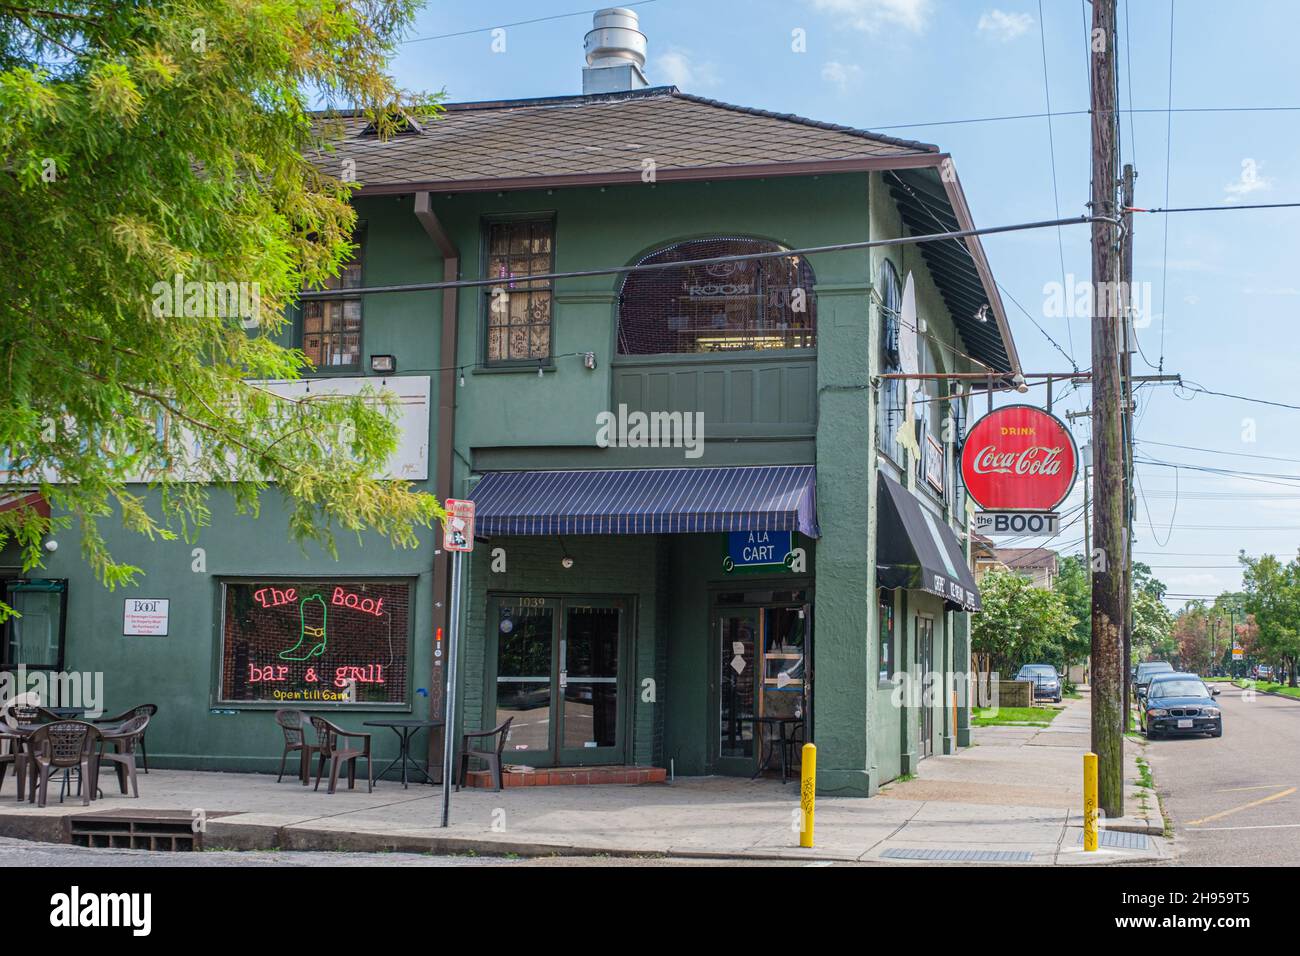 NEW ORLEANS, LA, USA - JULY 4, 2020: The Boot Bar and Grill, Tulane University student hangout on Broadway Street Stock Photo